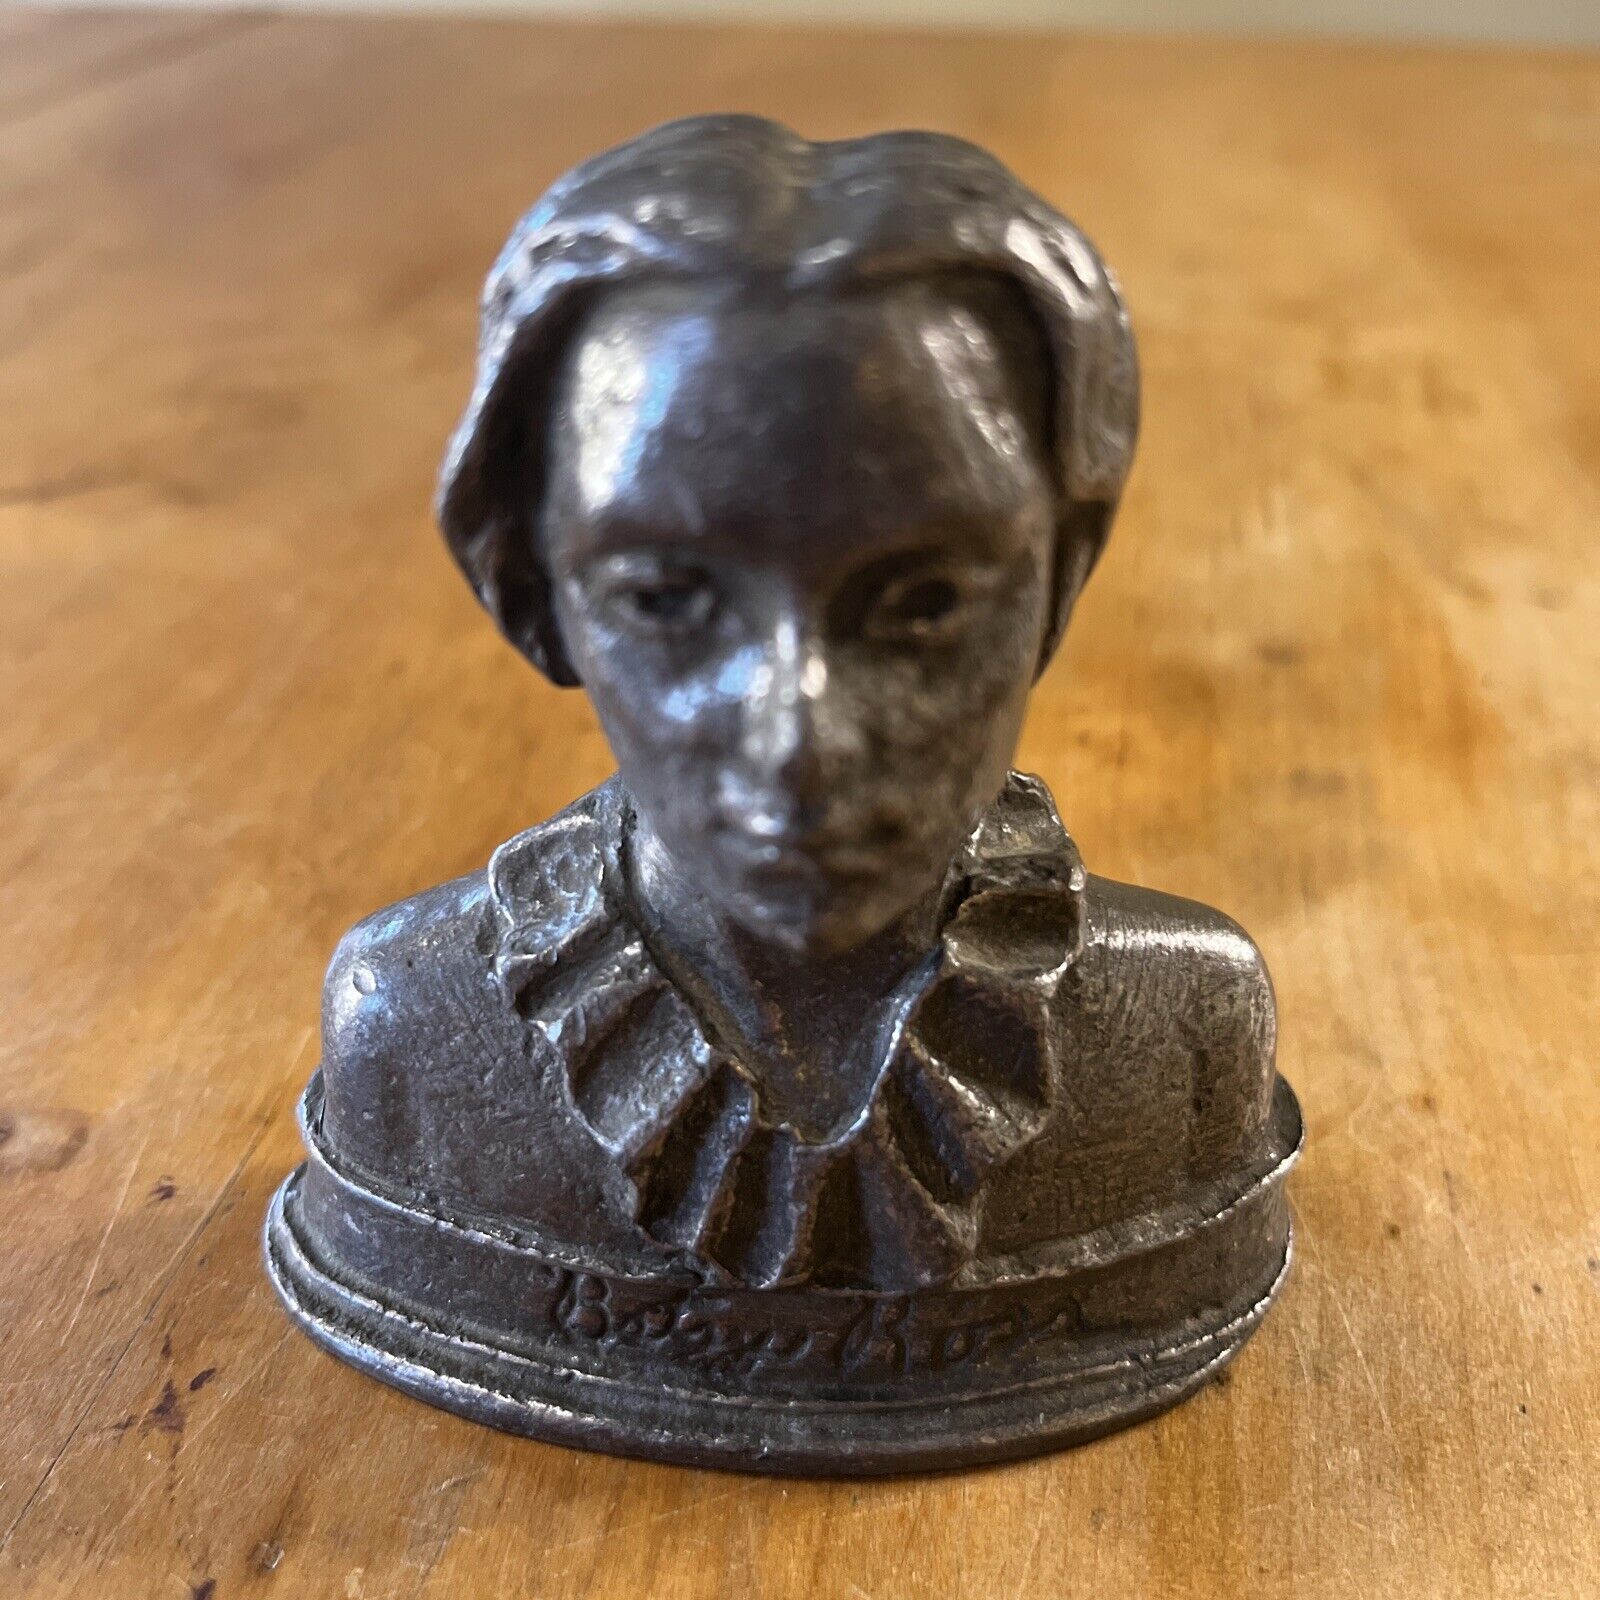 Vintage BETSY ROSS bust statue metal  3.25 X 3.5 Inches  Pewter